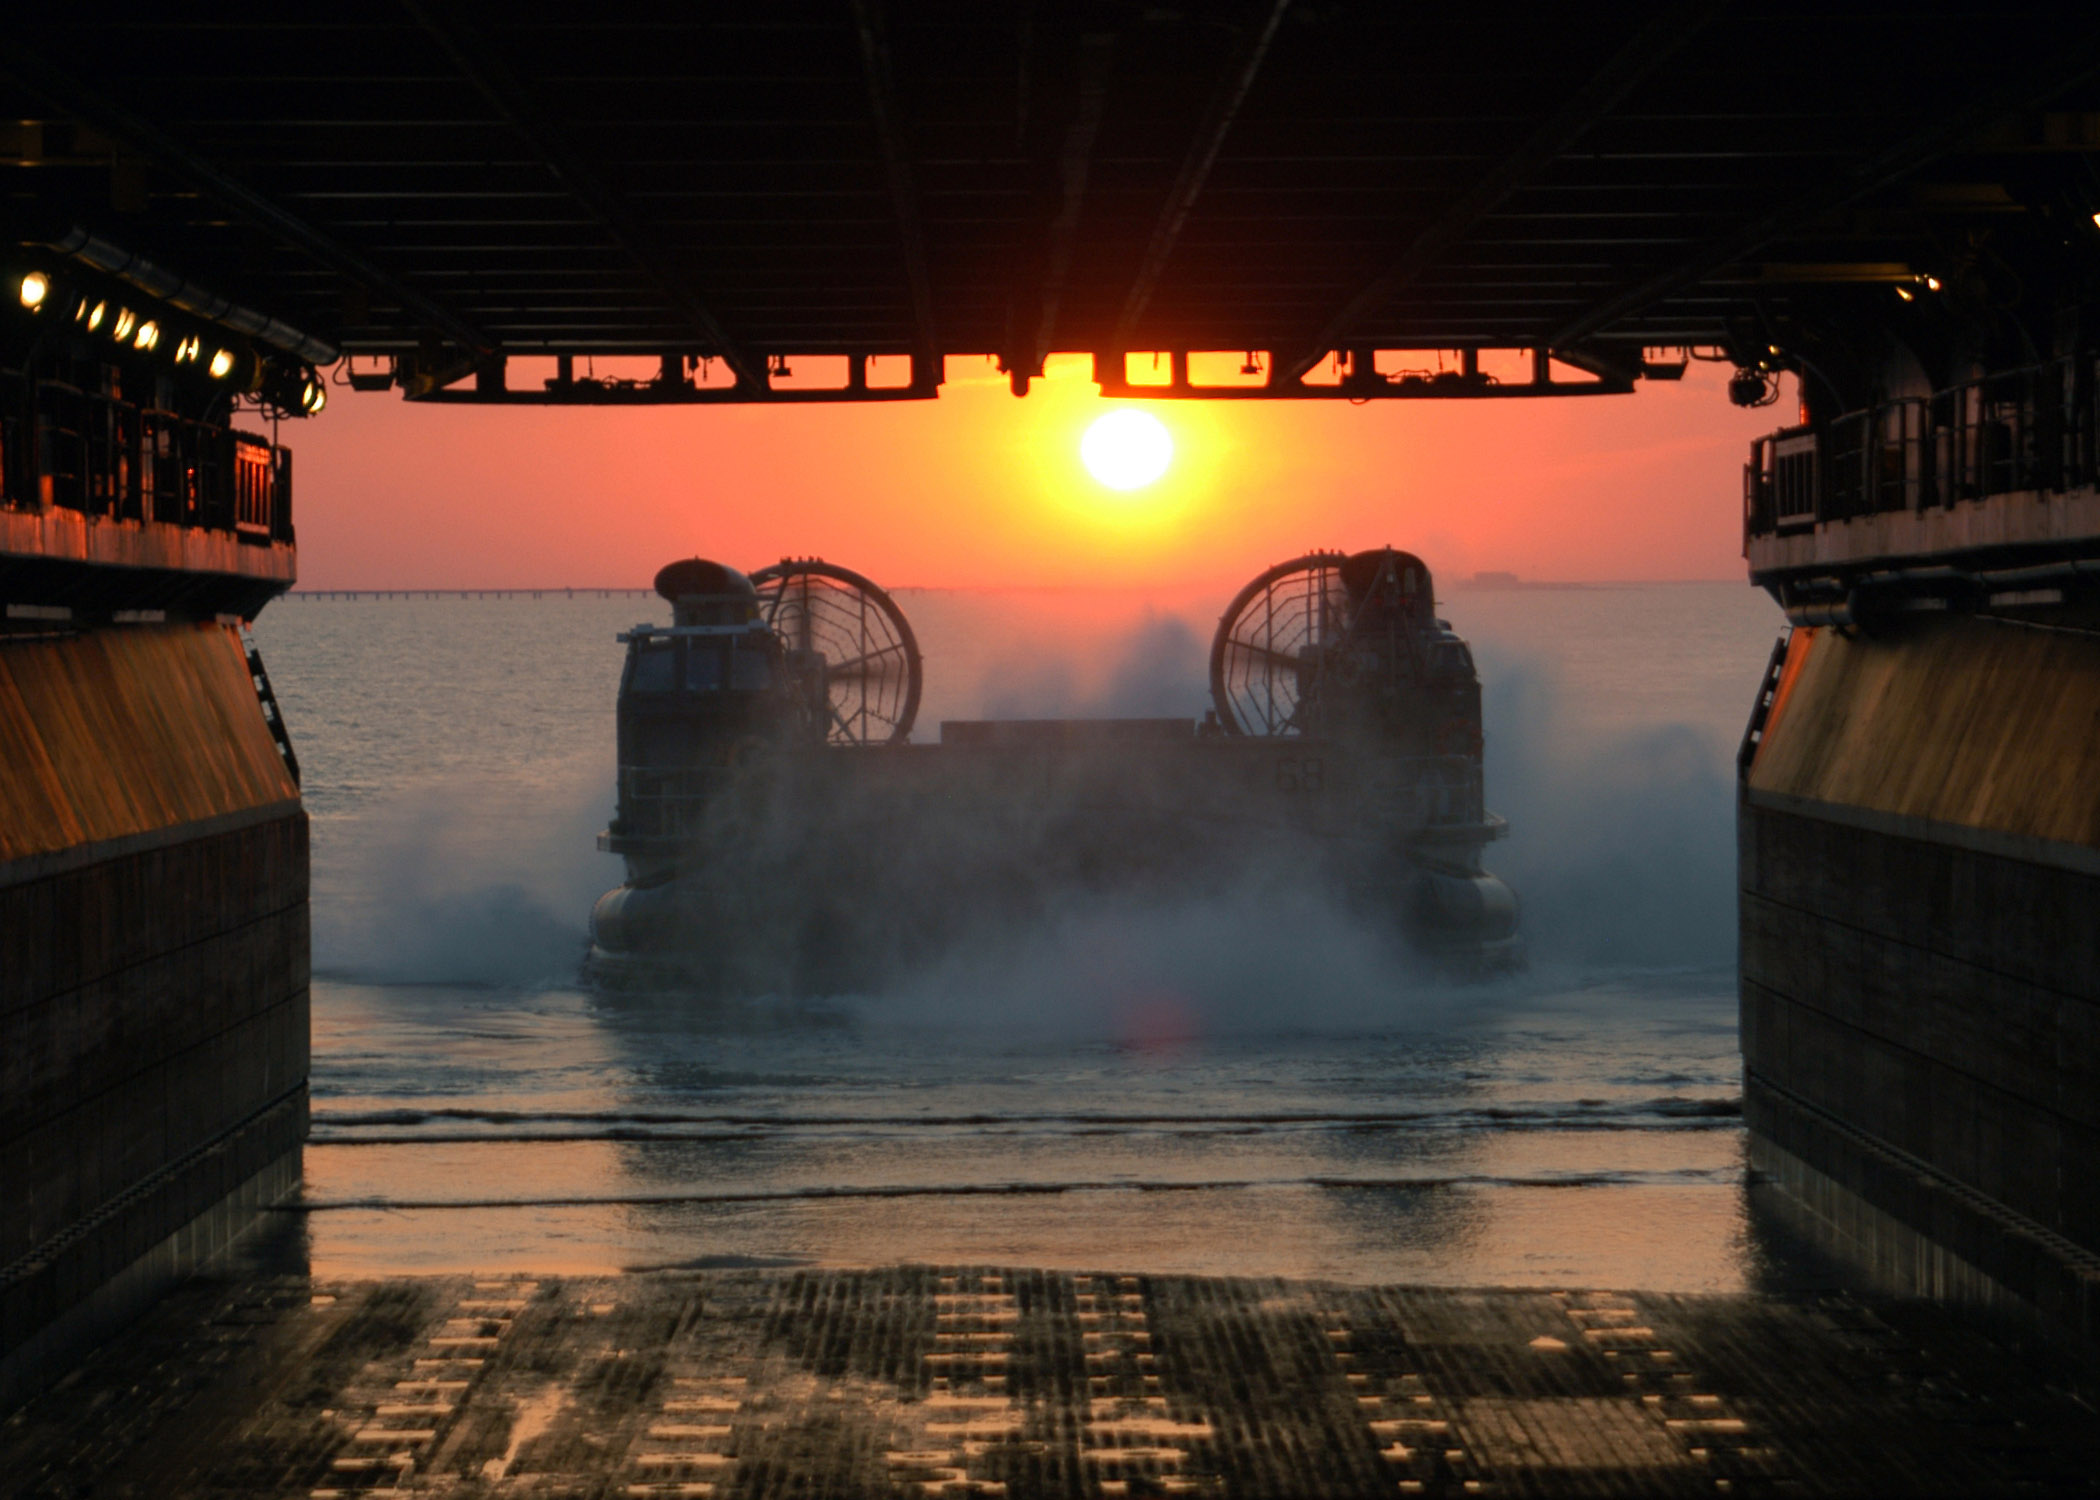 US Navy 060424-N-3557N-083 A Landing Craft Air Cushion (LCAC) prepares to enter the well deck of amphibious assault ship, USS Kearsarge (LHD 3)